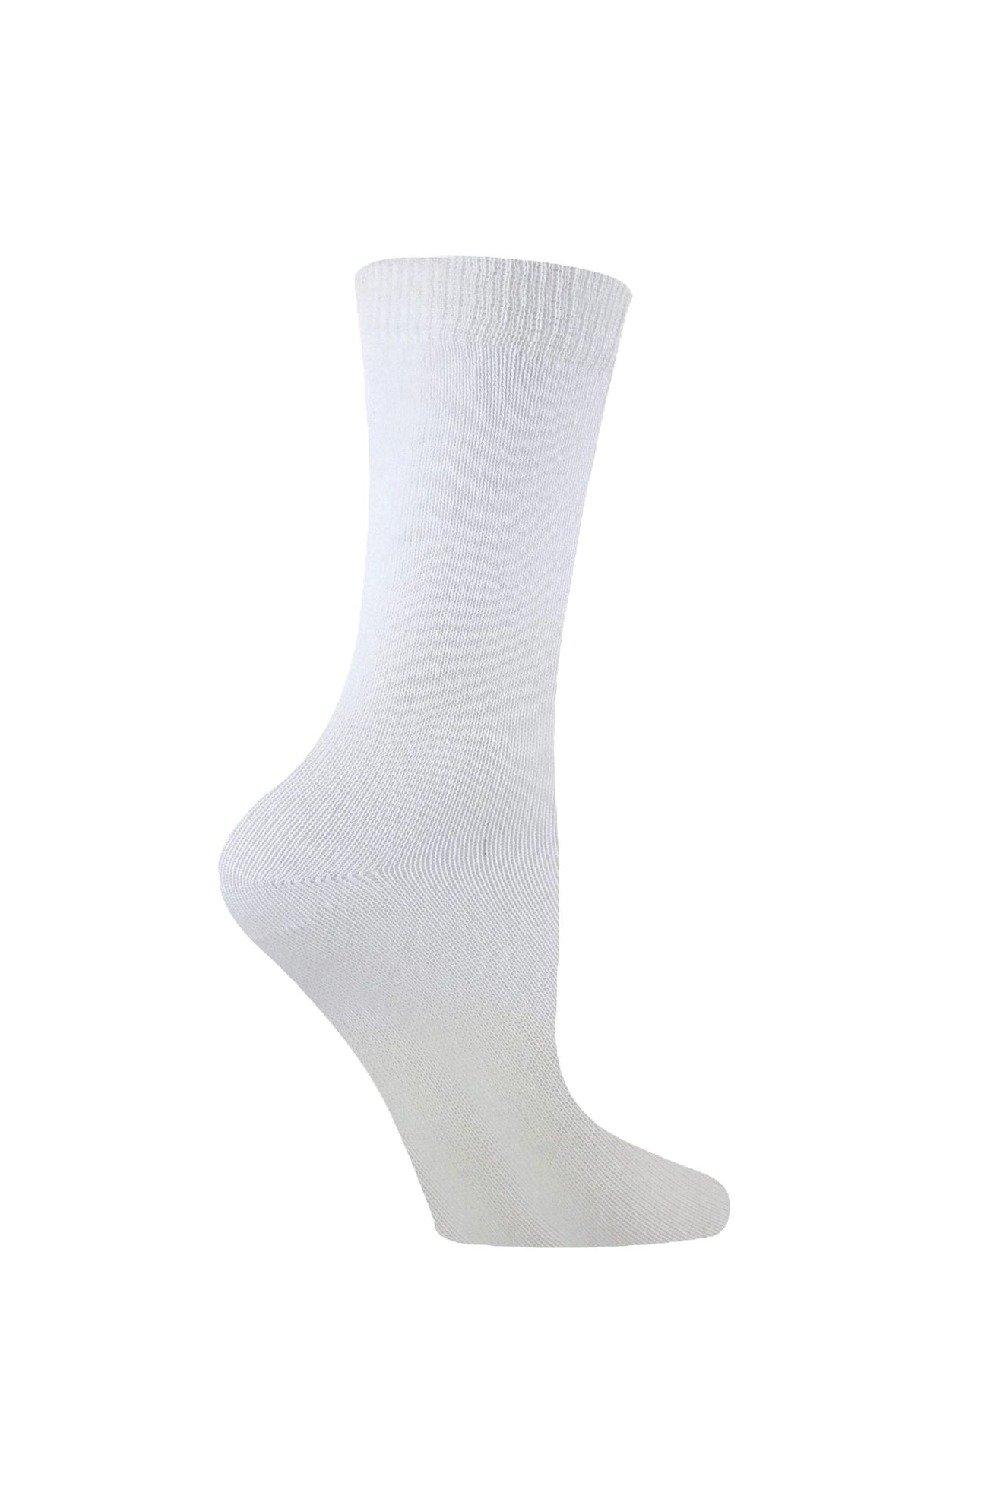 6 Pairs Soft Breathable Bamboo Casual School Socks